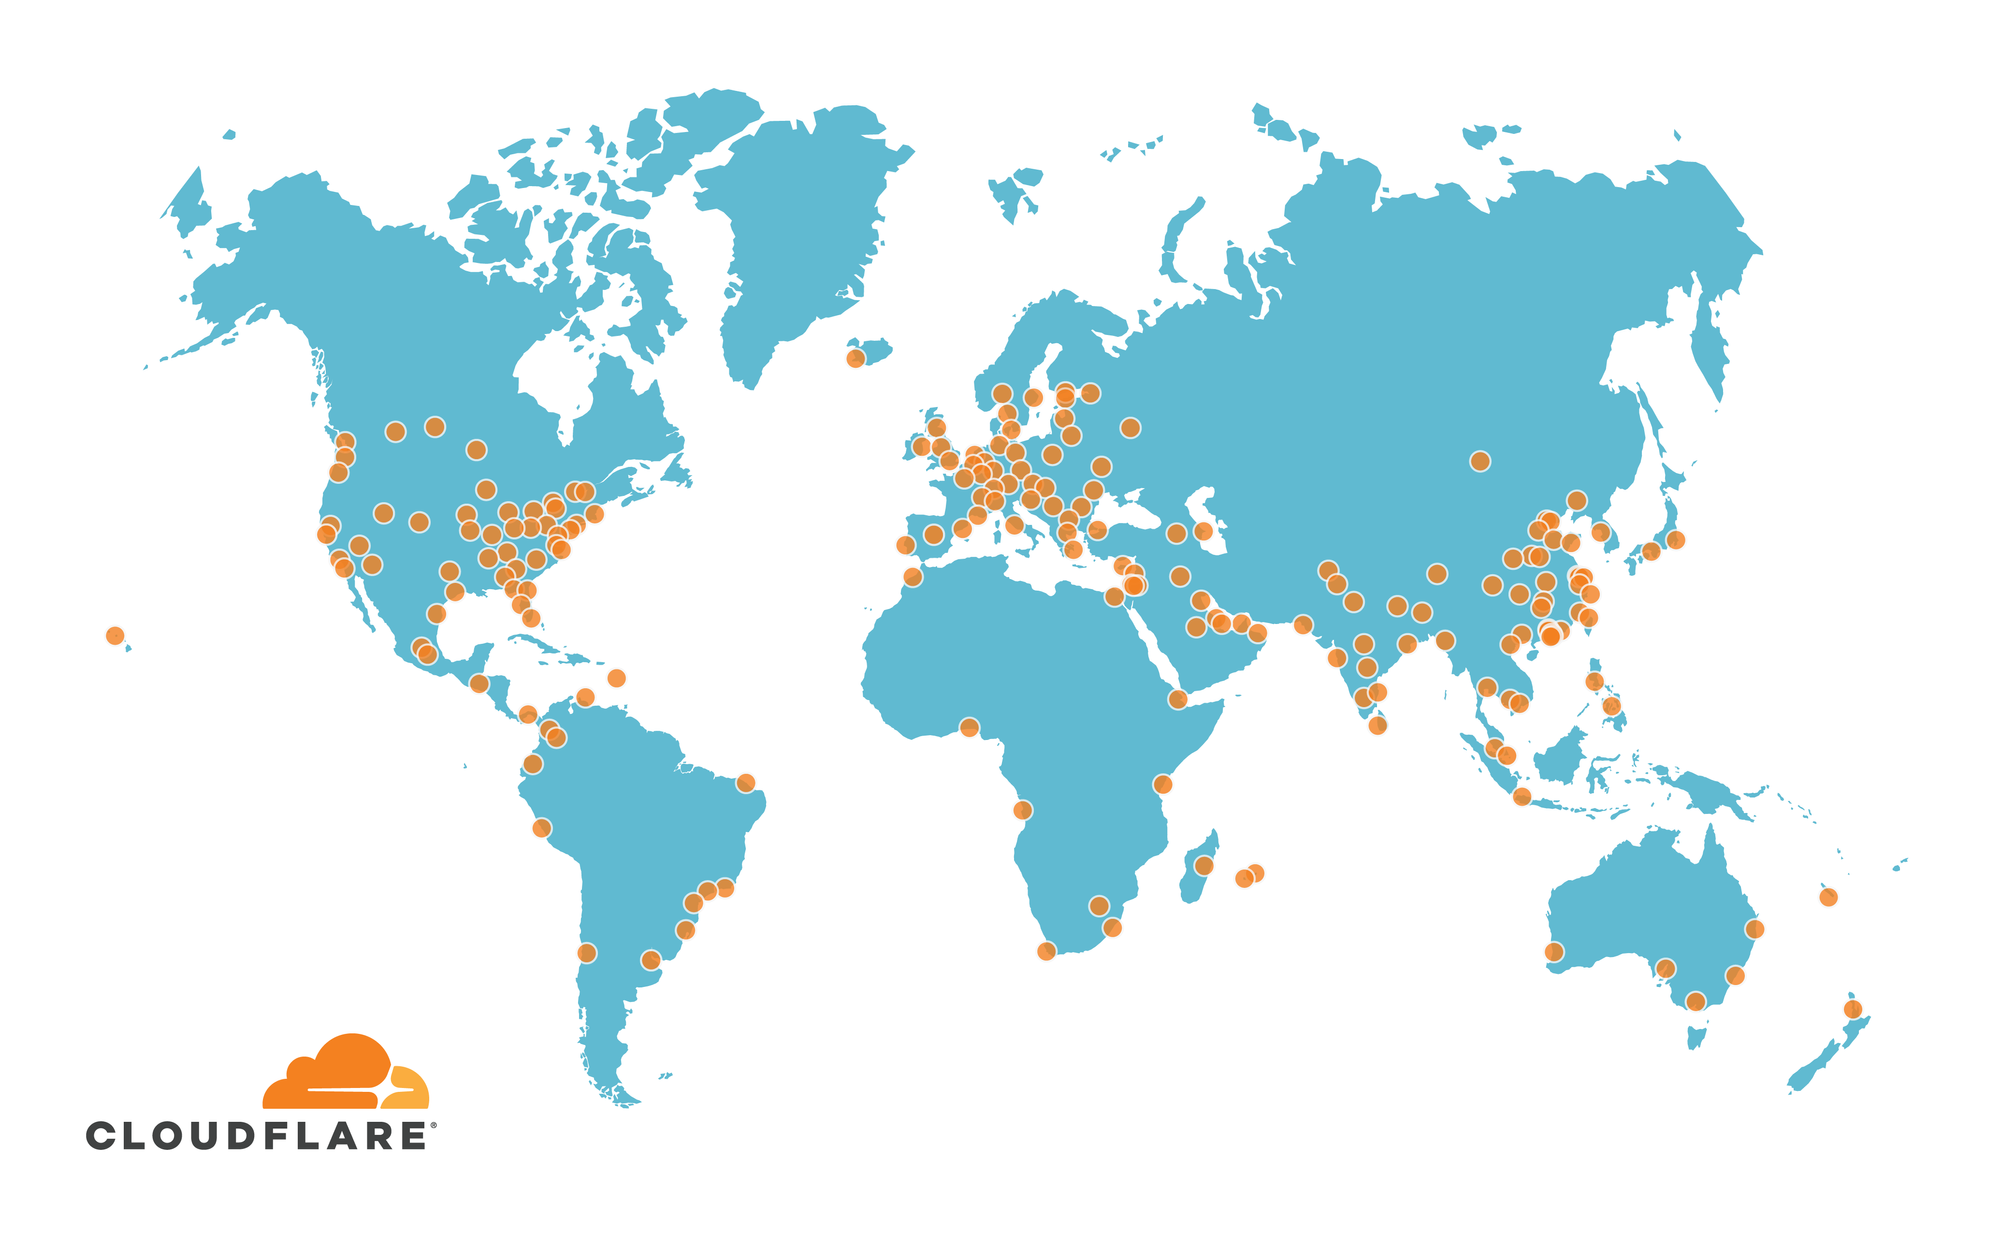 Cloudflare Expanded to 200 Cities in 2019